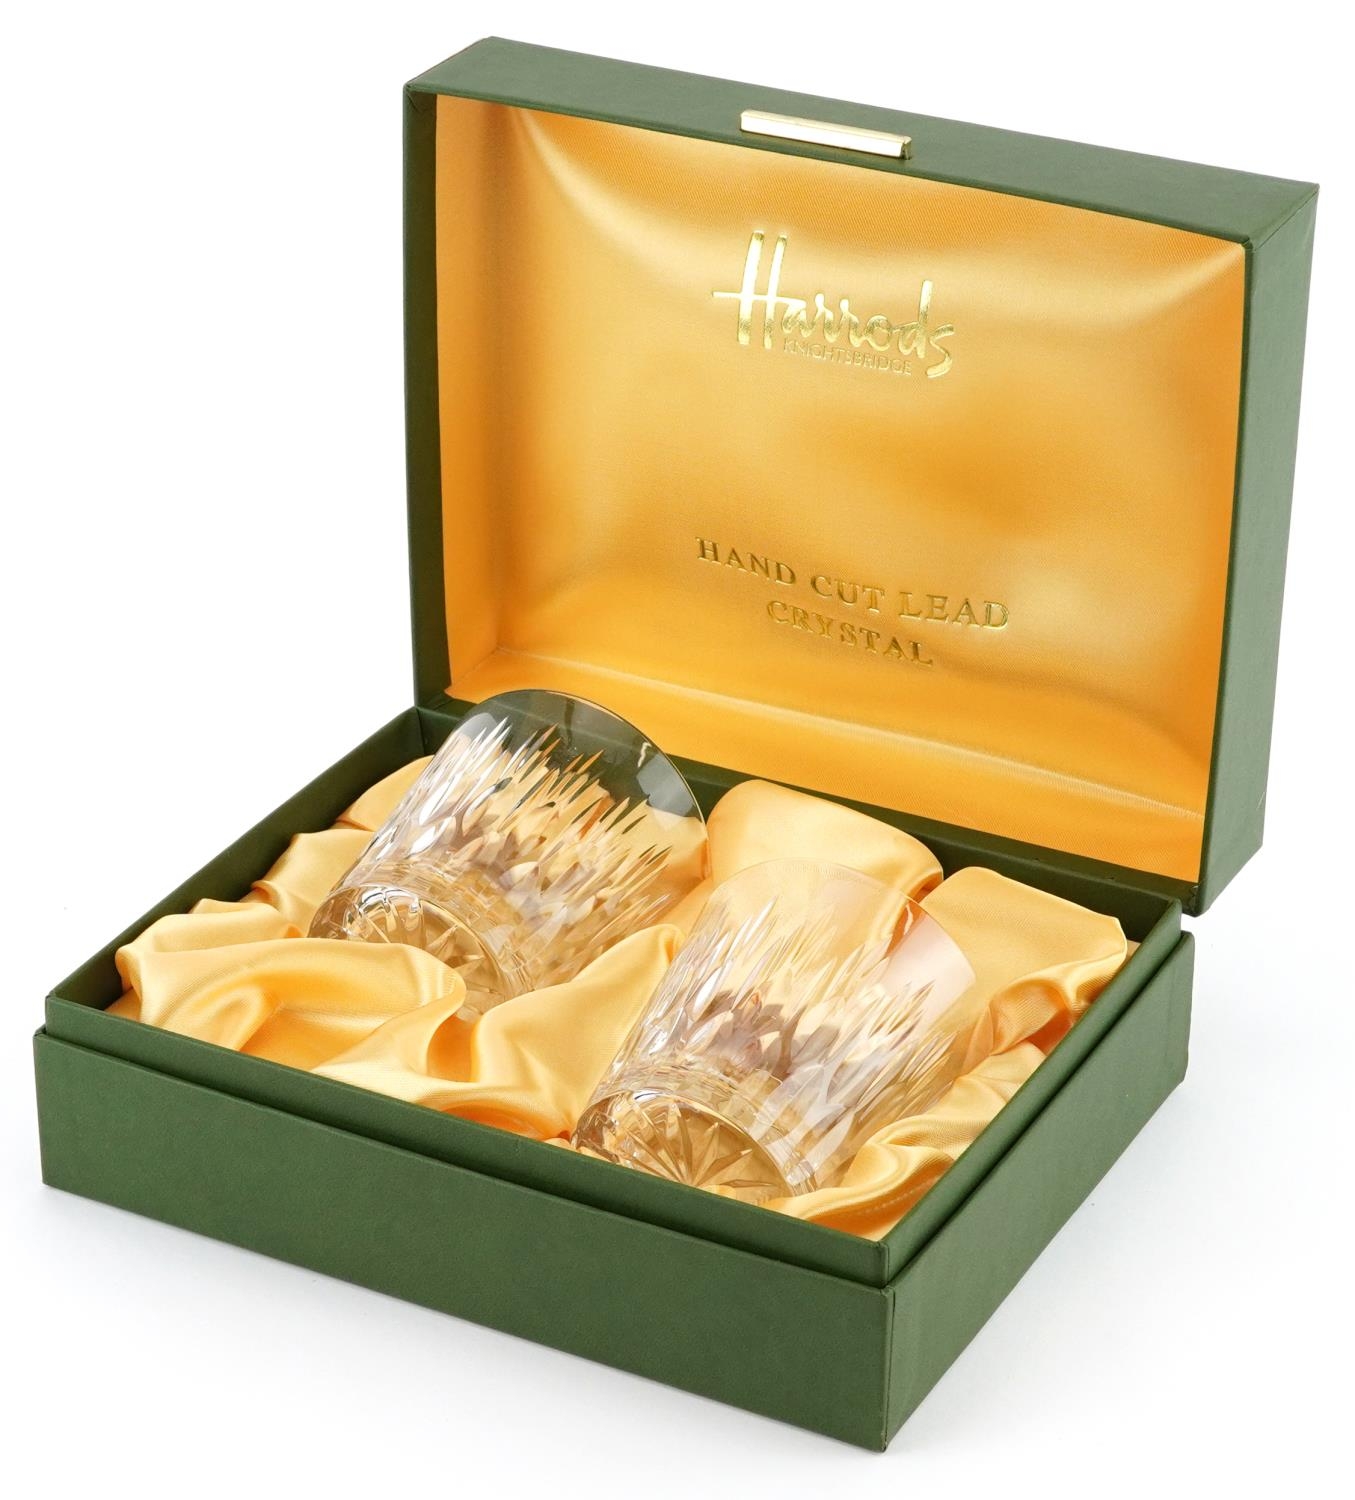 Pair of Harrods crystal glasses housed in a fitted box, each glass 8cm high